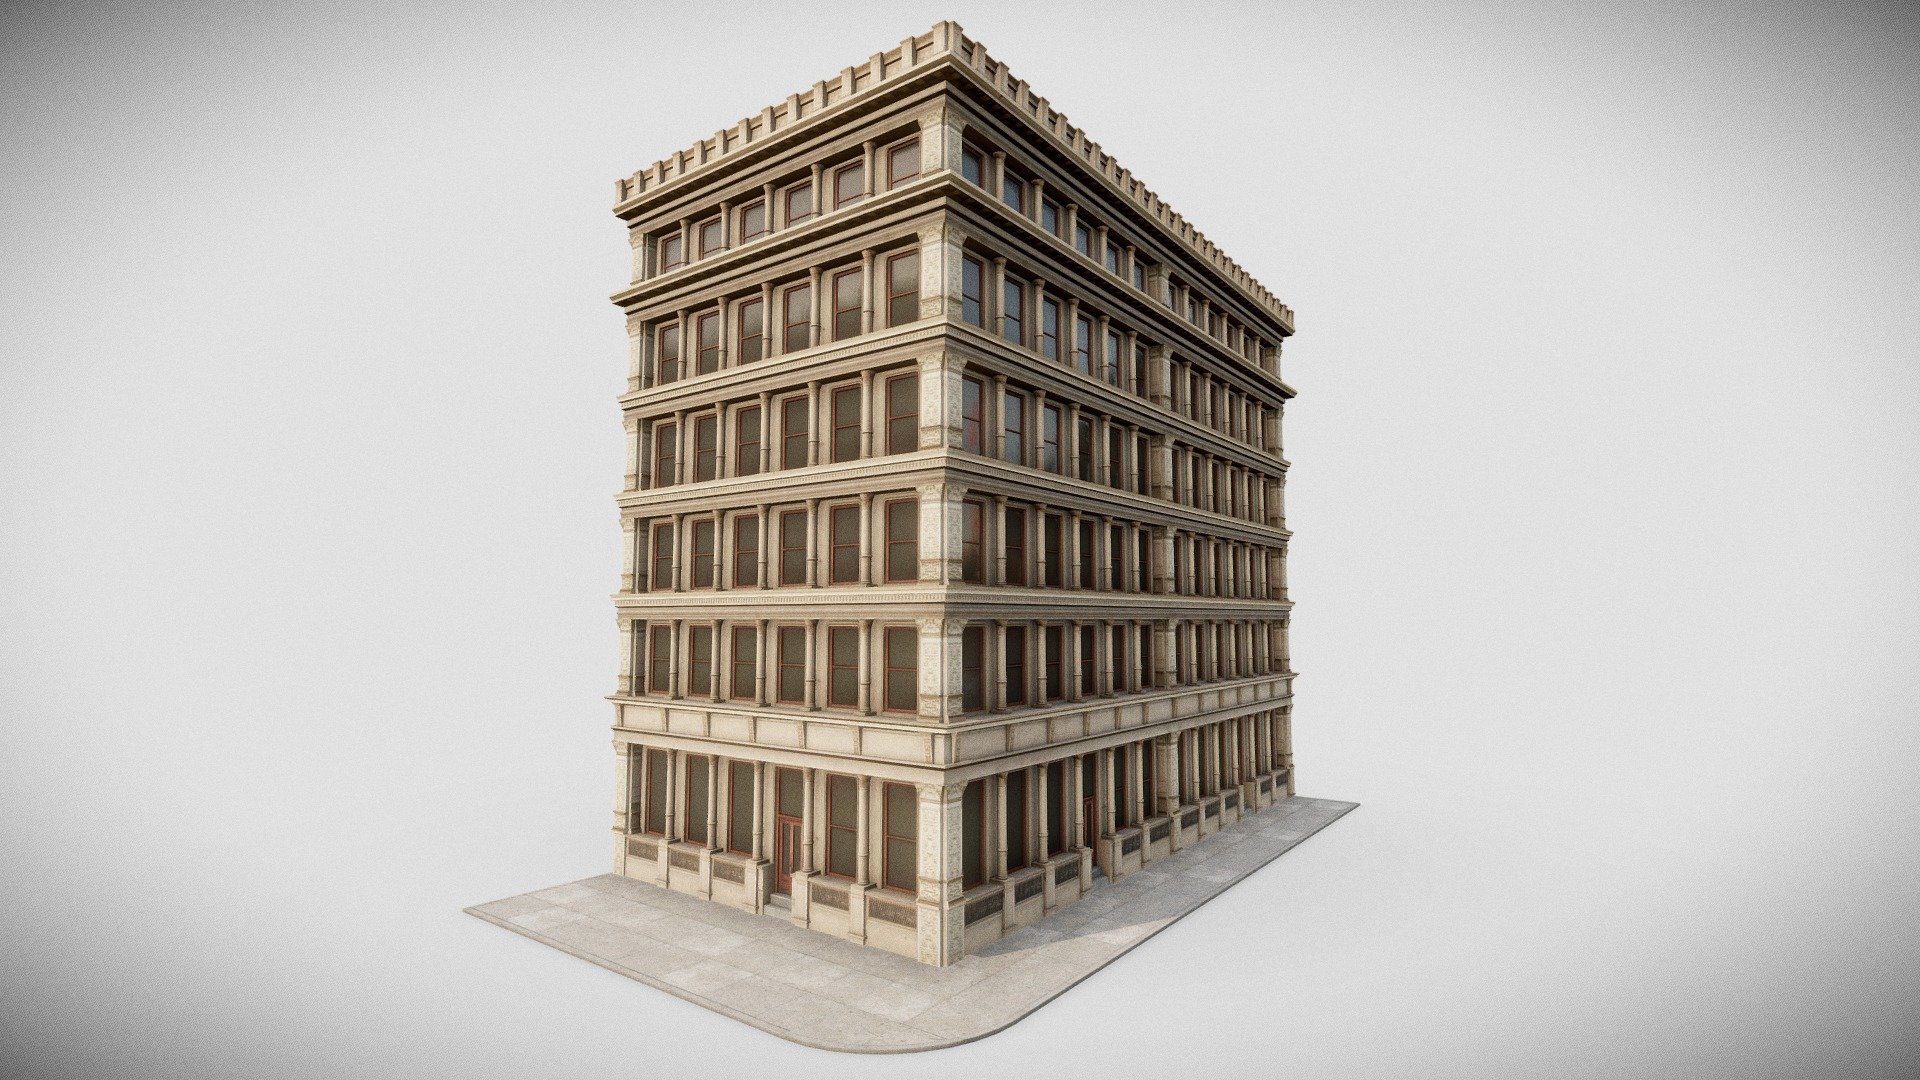 SoHo Cast-Iron Steel building in Manhattan. 



Textures Included:




4k baked textures

Diffuse

Roughness

Ambient Occlusion

Formats:




.obj

.fbx

.blend

View the full building pack here: https://sketchfab.com/3d-models/manhattan-modular-city-block-358-broadway-st-71f1ca2b46a84c0d907b71f78c34b790 - Low Poly Manhattan Cast Iron SoHo Building - Buy Royalty Free 3D model by 99.Miles 3d model